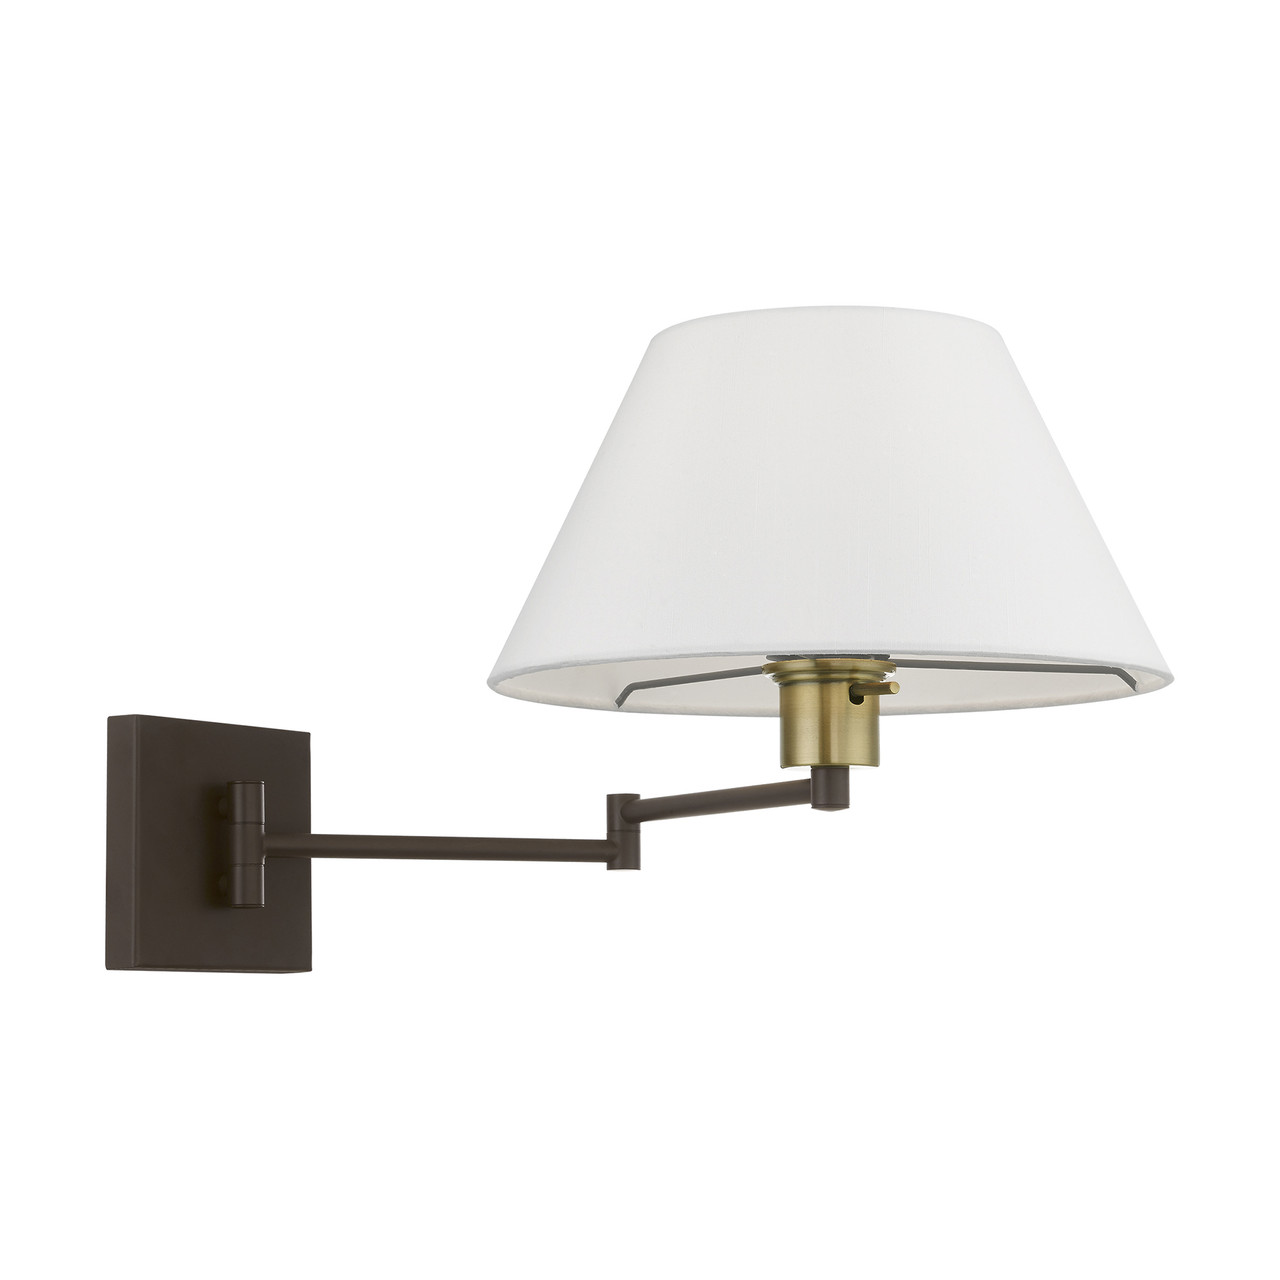 LIVEX LIGHTING 40039-07 1 Light Bronze with Antique Brass Accent Swing Arm Wall Lamp